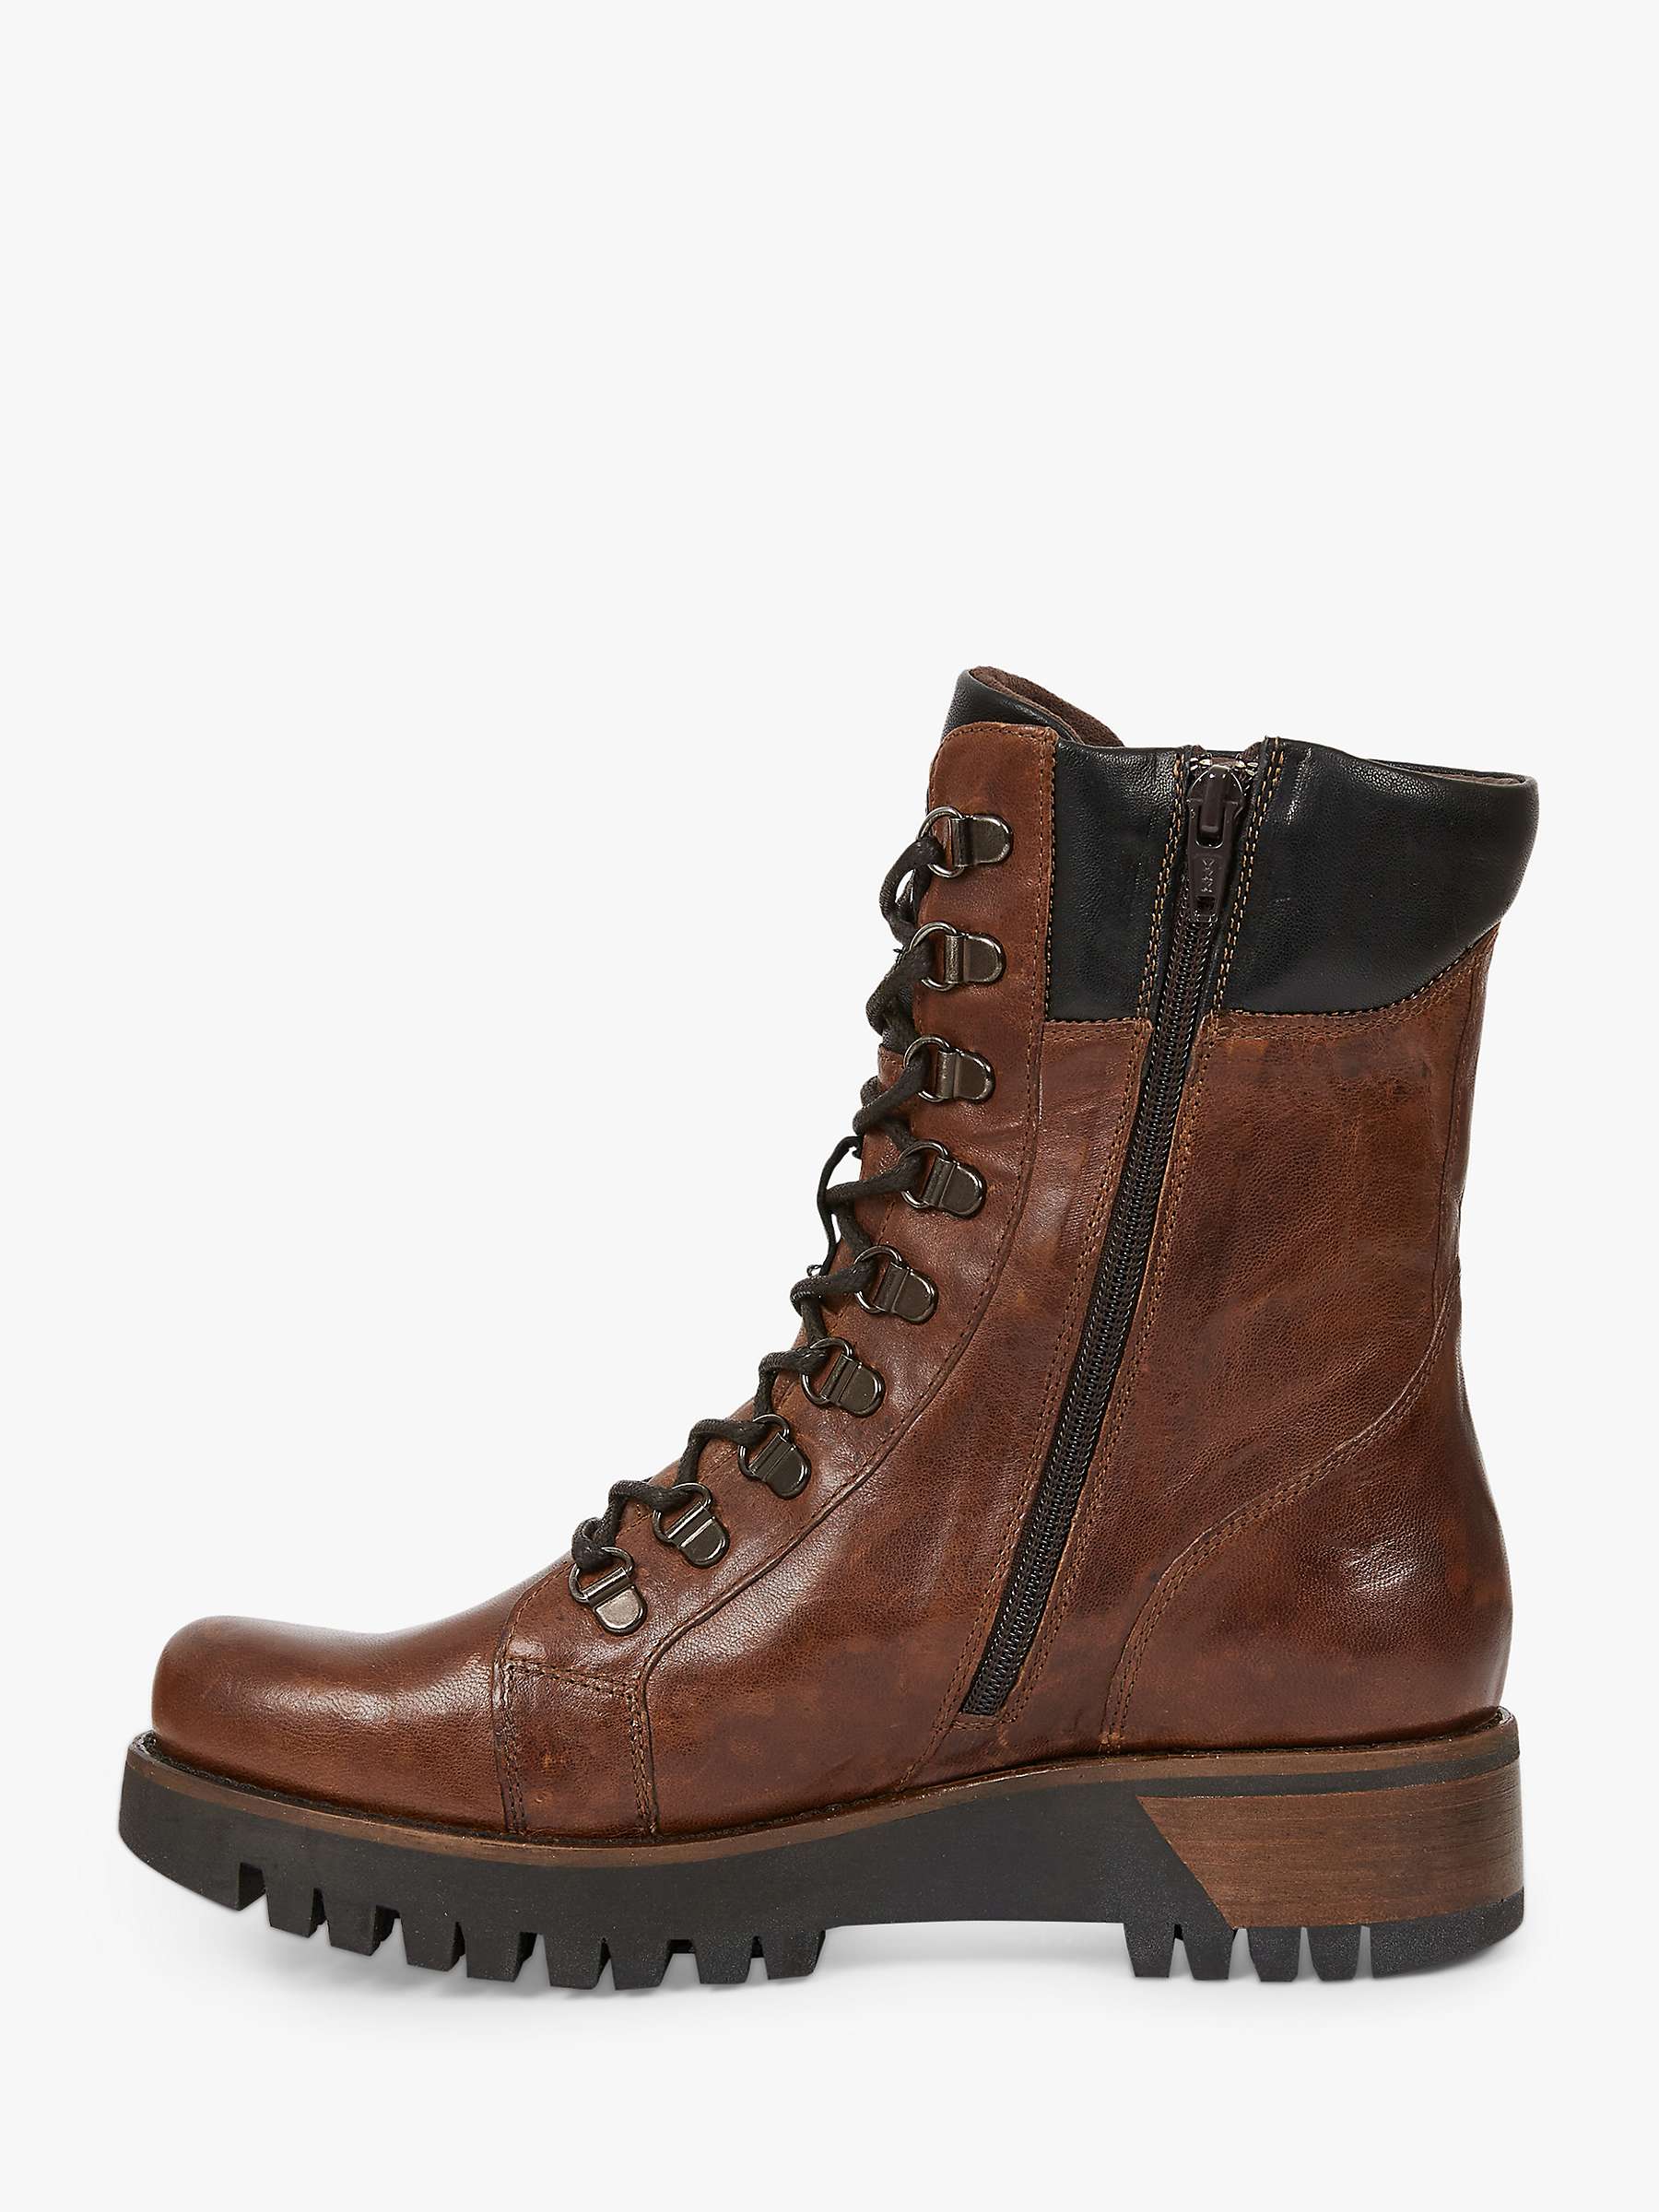 Celtic & Co. Wilds Leather Lace Up Boots, Rust at John Lewis & Partners